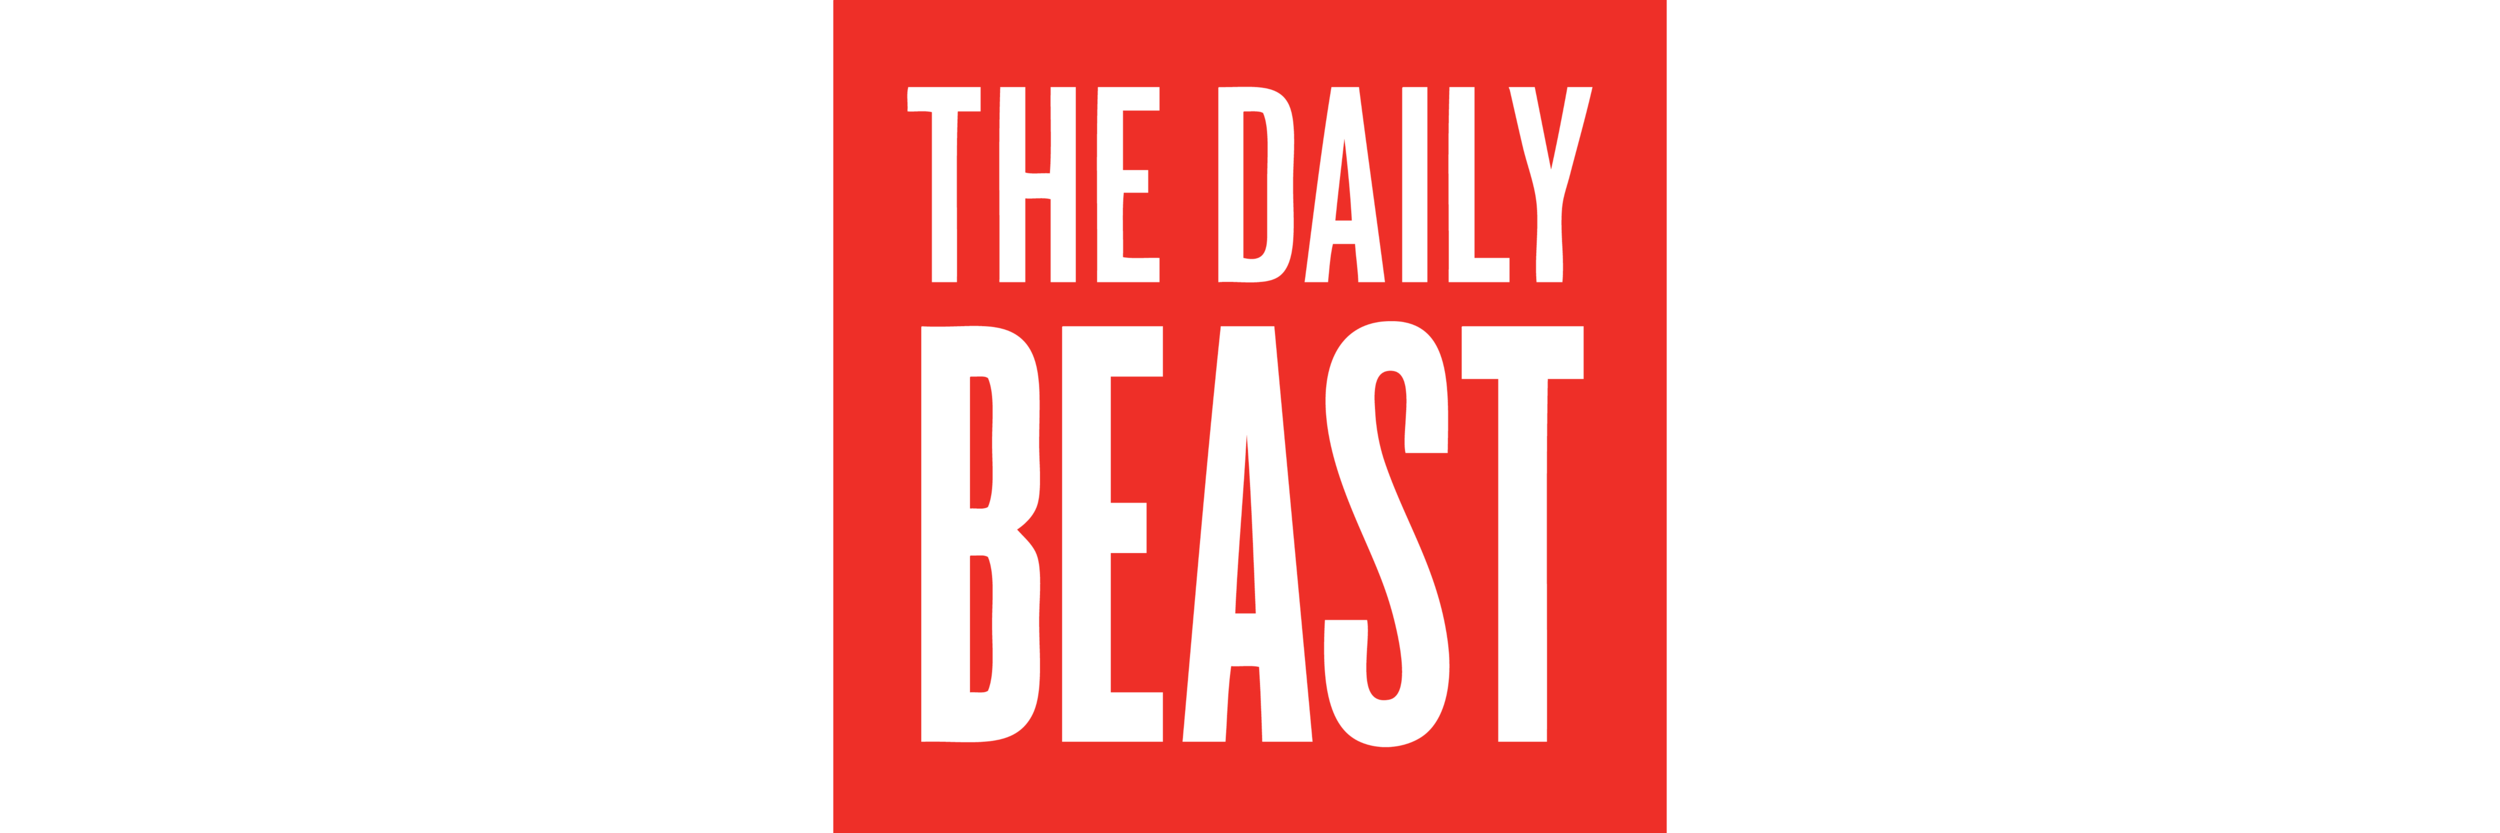 daily-beast-logo--resized.png